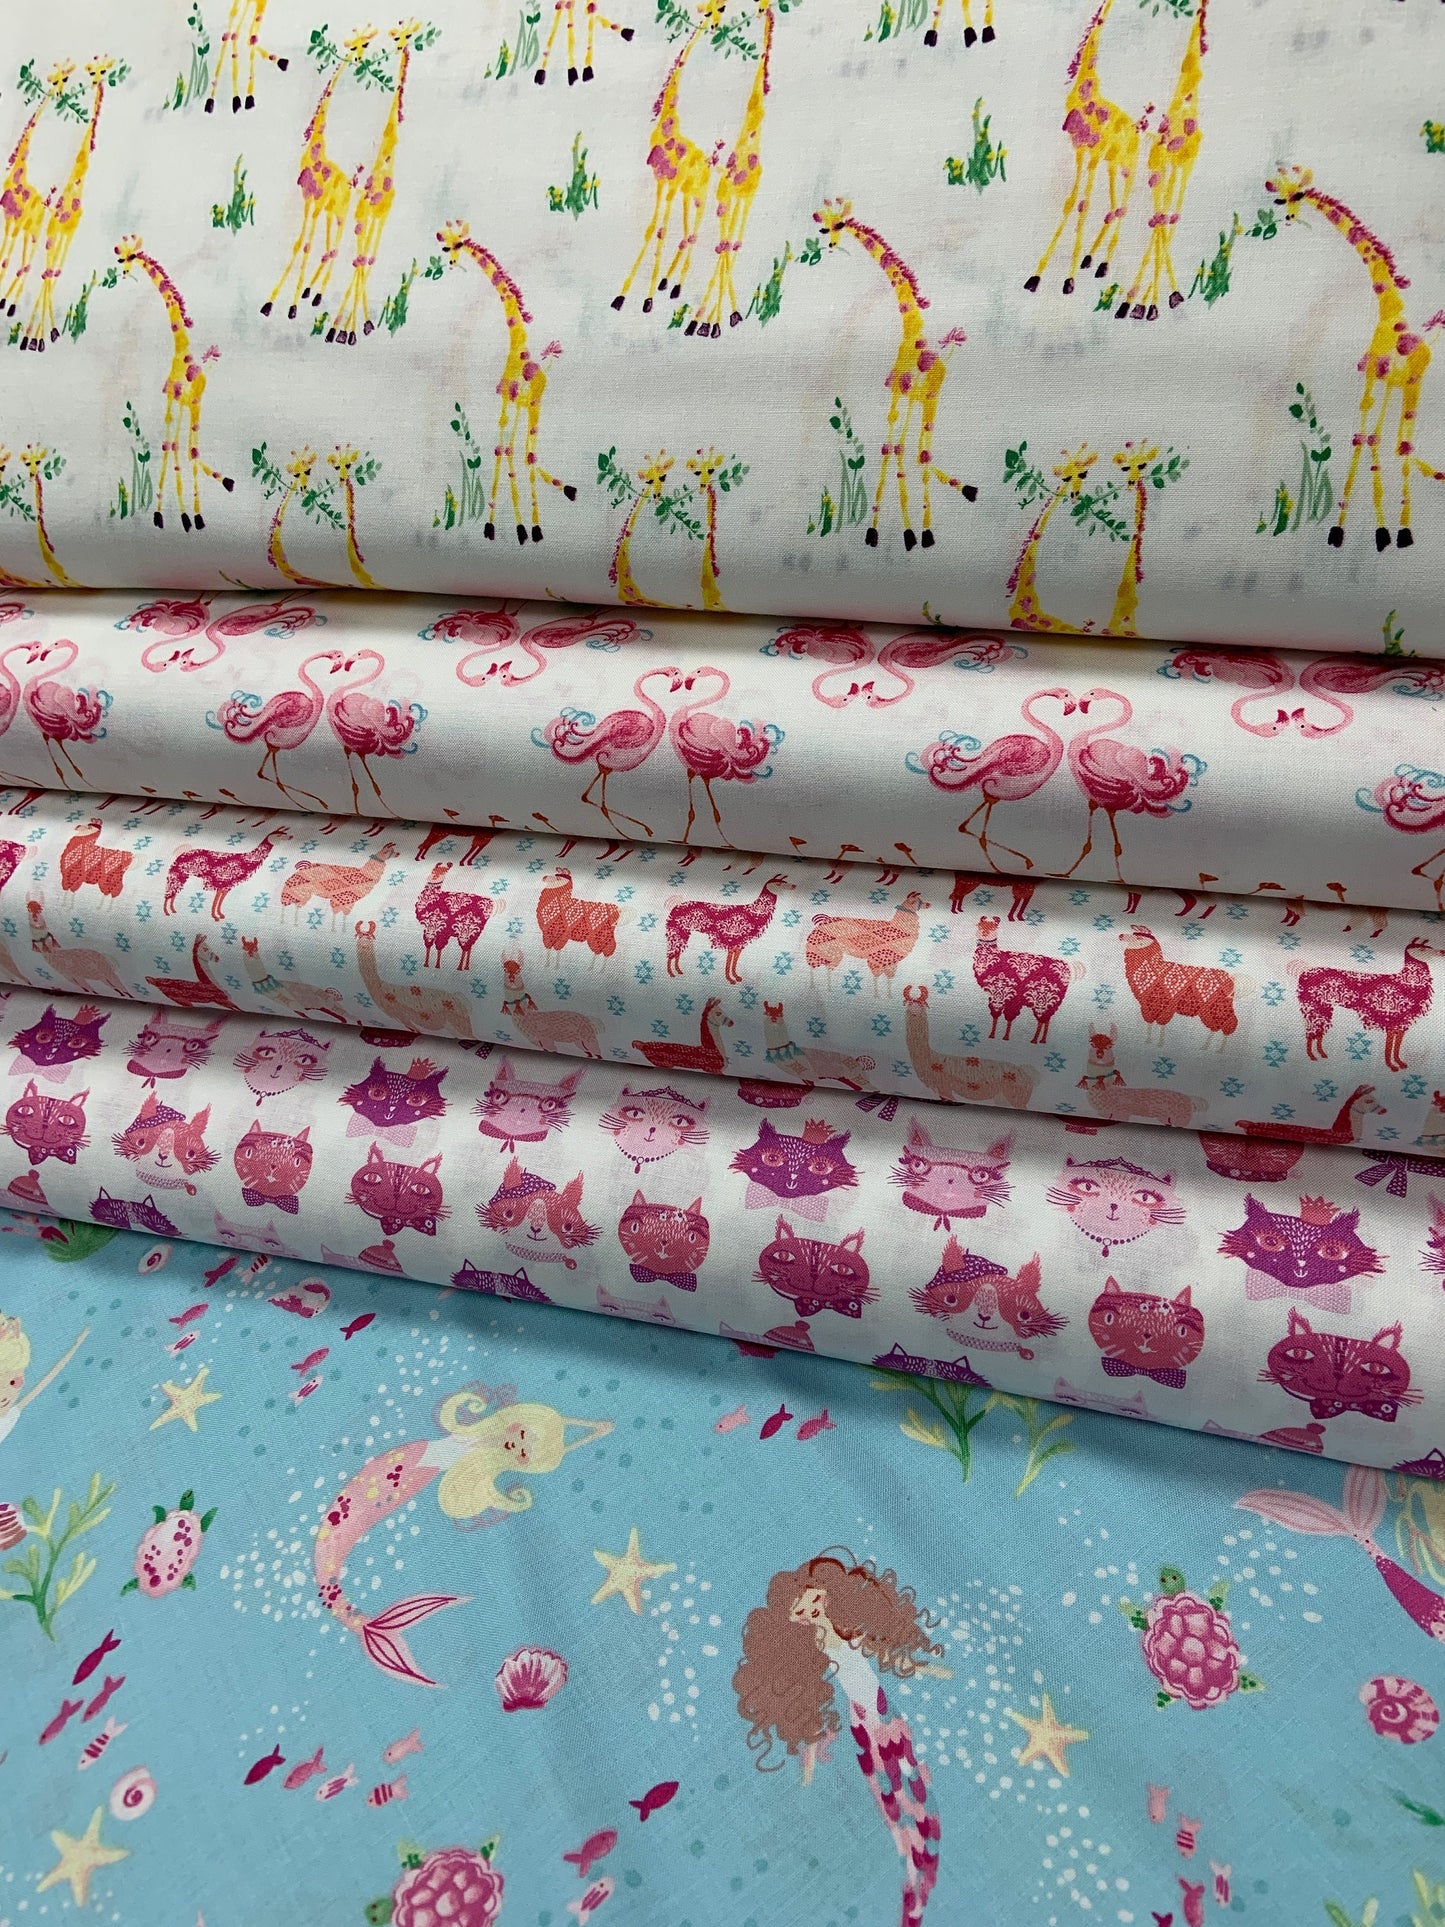 The Girls Collection by Laura Ashley White Flamingle 71190106-1 Cotton Woven Fabric